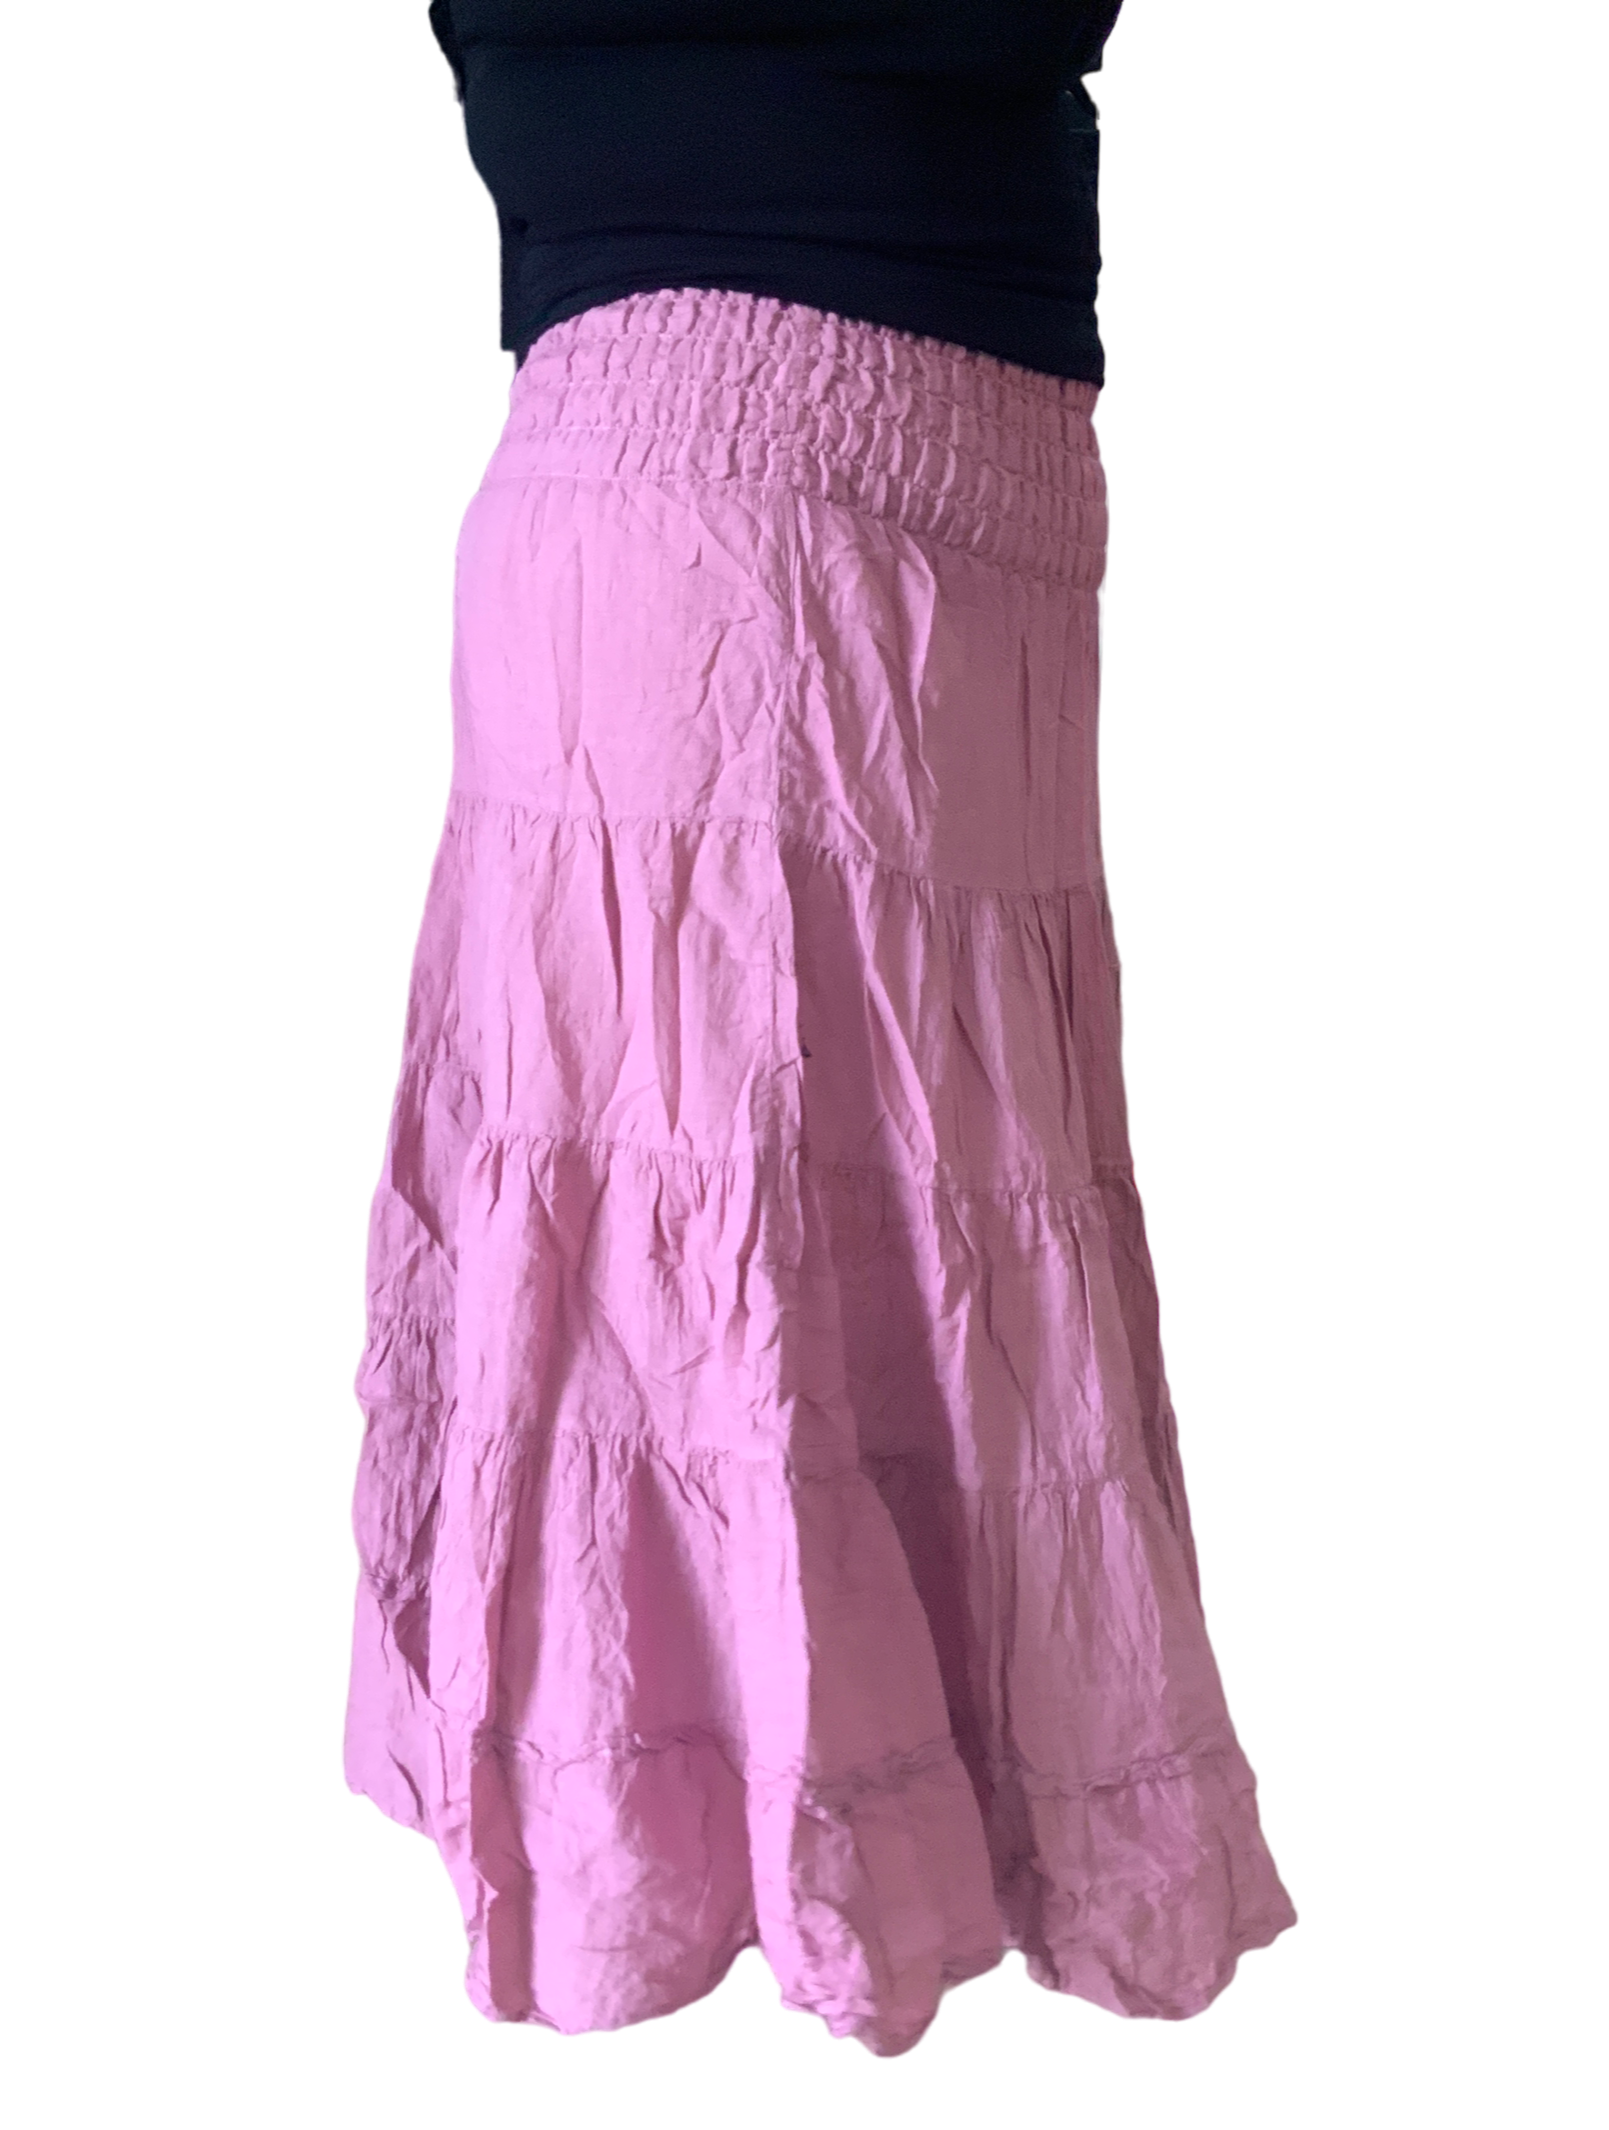 Pale Rose Cotton Voile Tiered Skirt